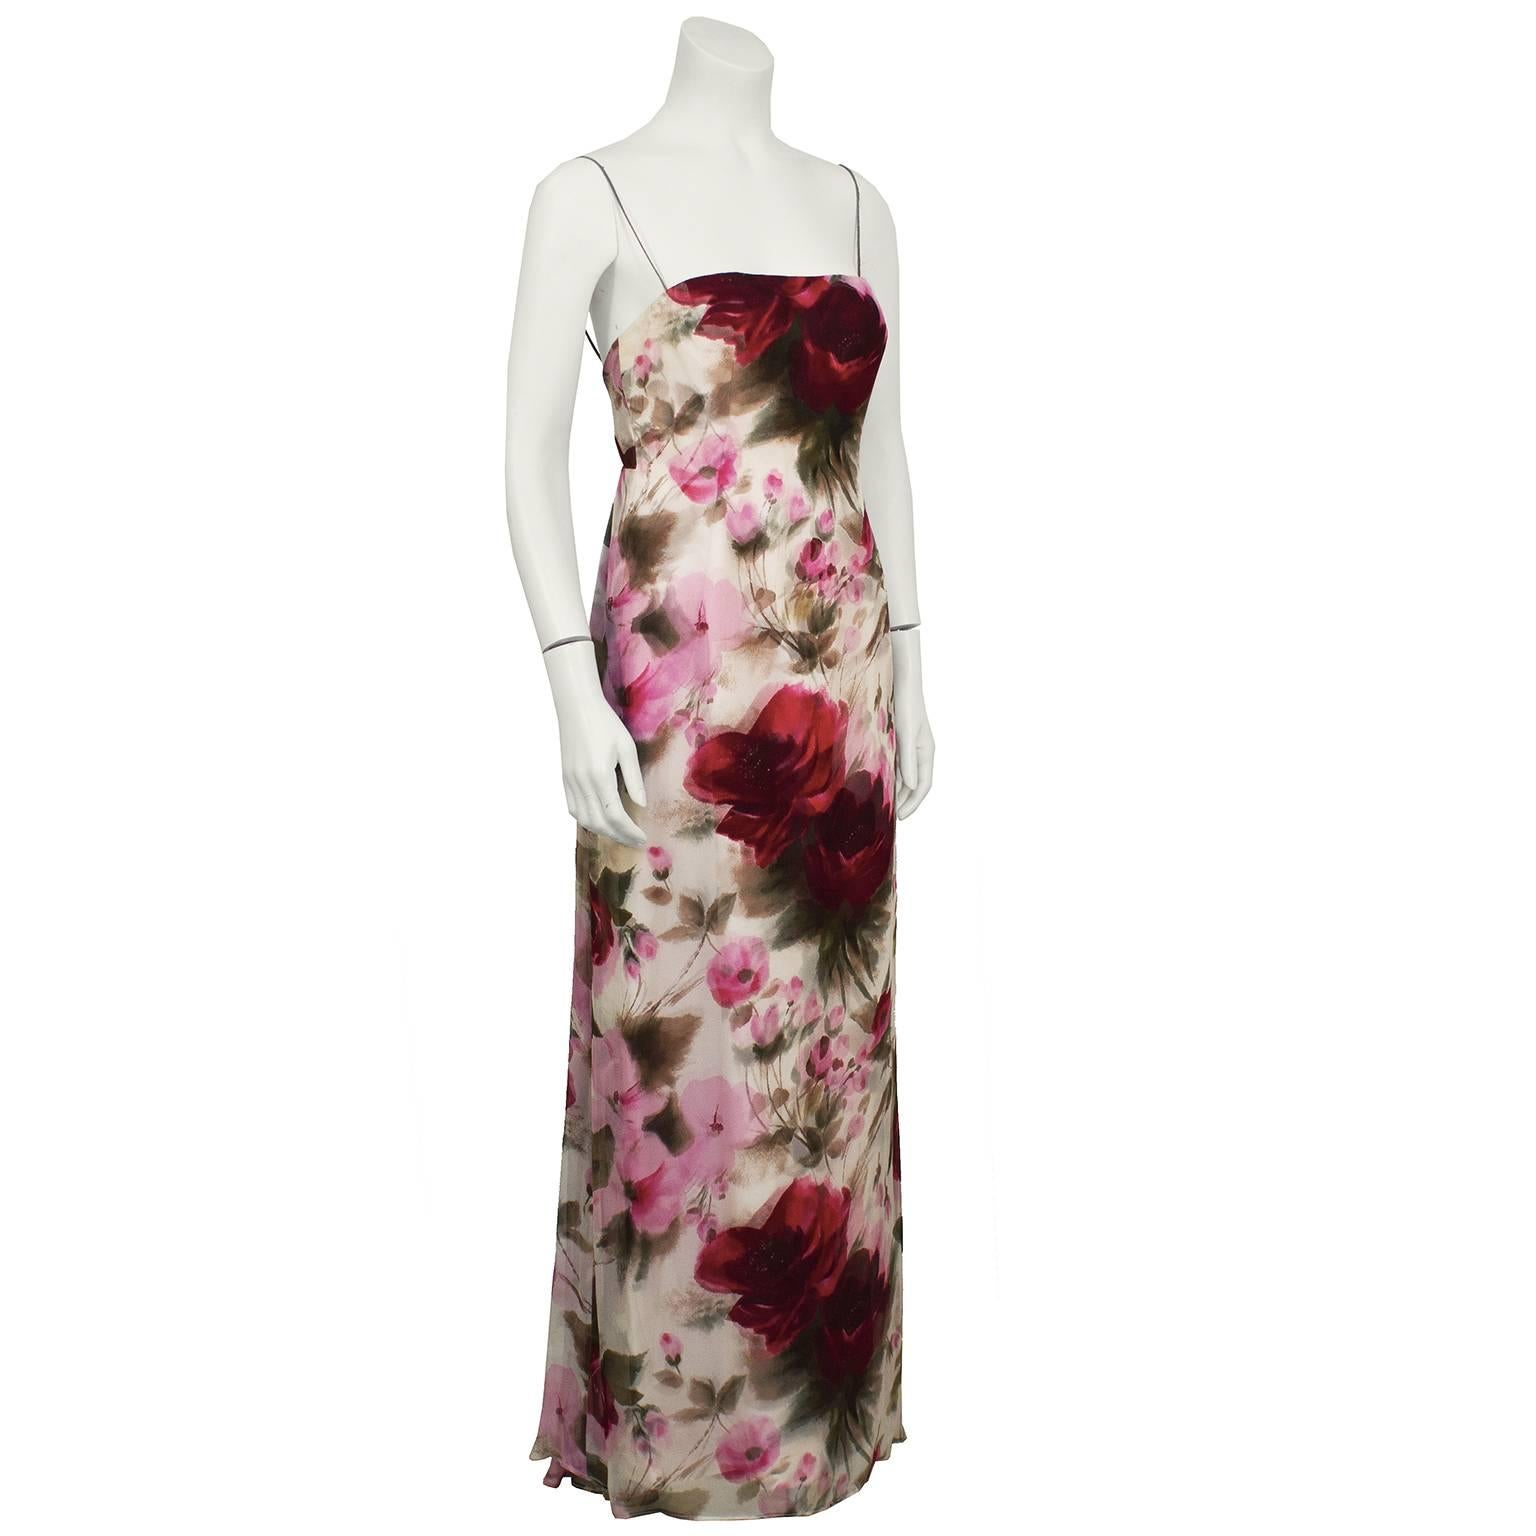 1970's Helena Barbieri pink and red floral printed evening gown. Spaghetti straps, chemise style neckline, chiffon layer falls from the natural waist with gathering in the back. Large rose floral print down the front of the dress. Zips up the back,